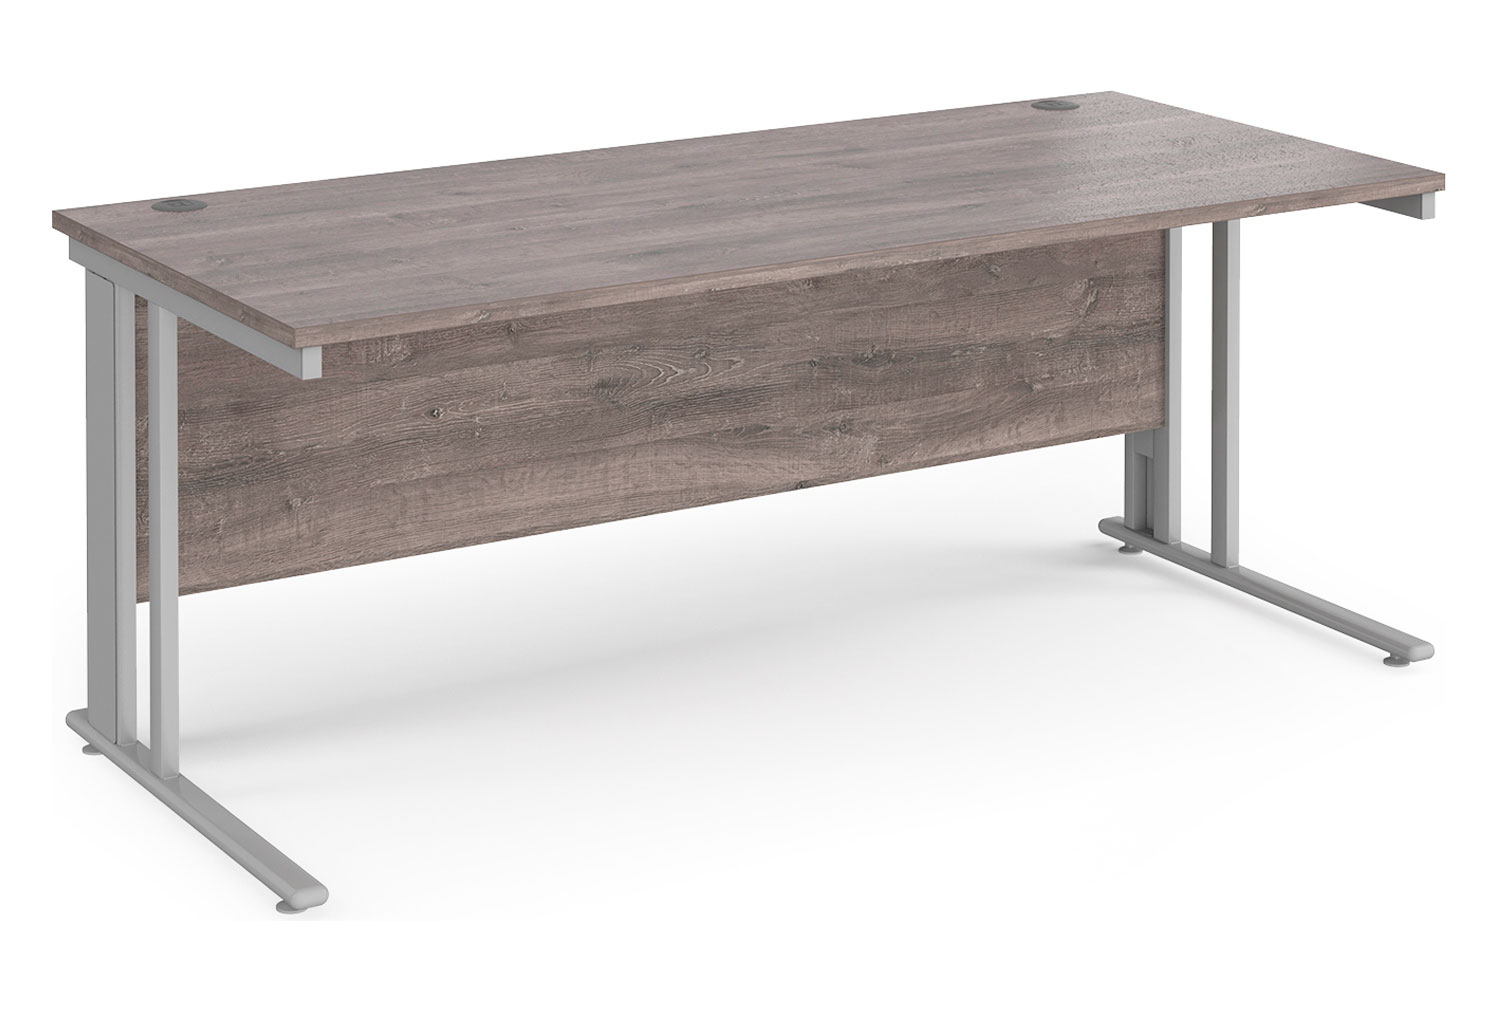 Value Line Deluxe Cable Managed Rectangular Office Desk (Silver Legs), 180wx80dx73h (cm), Grey Oak